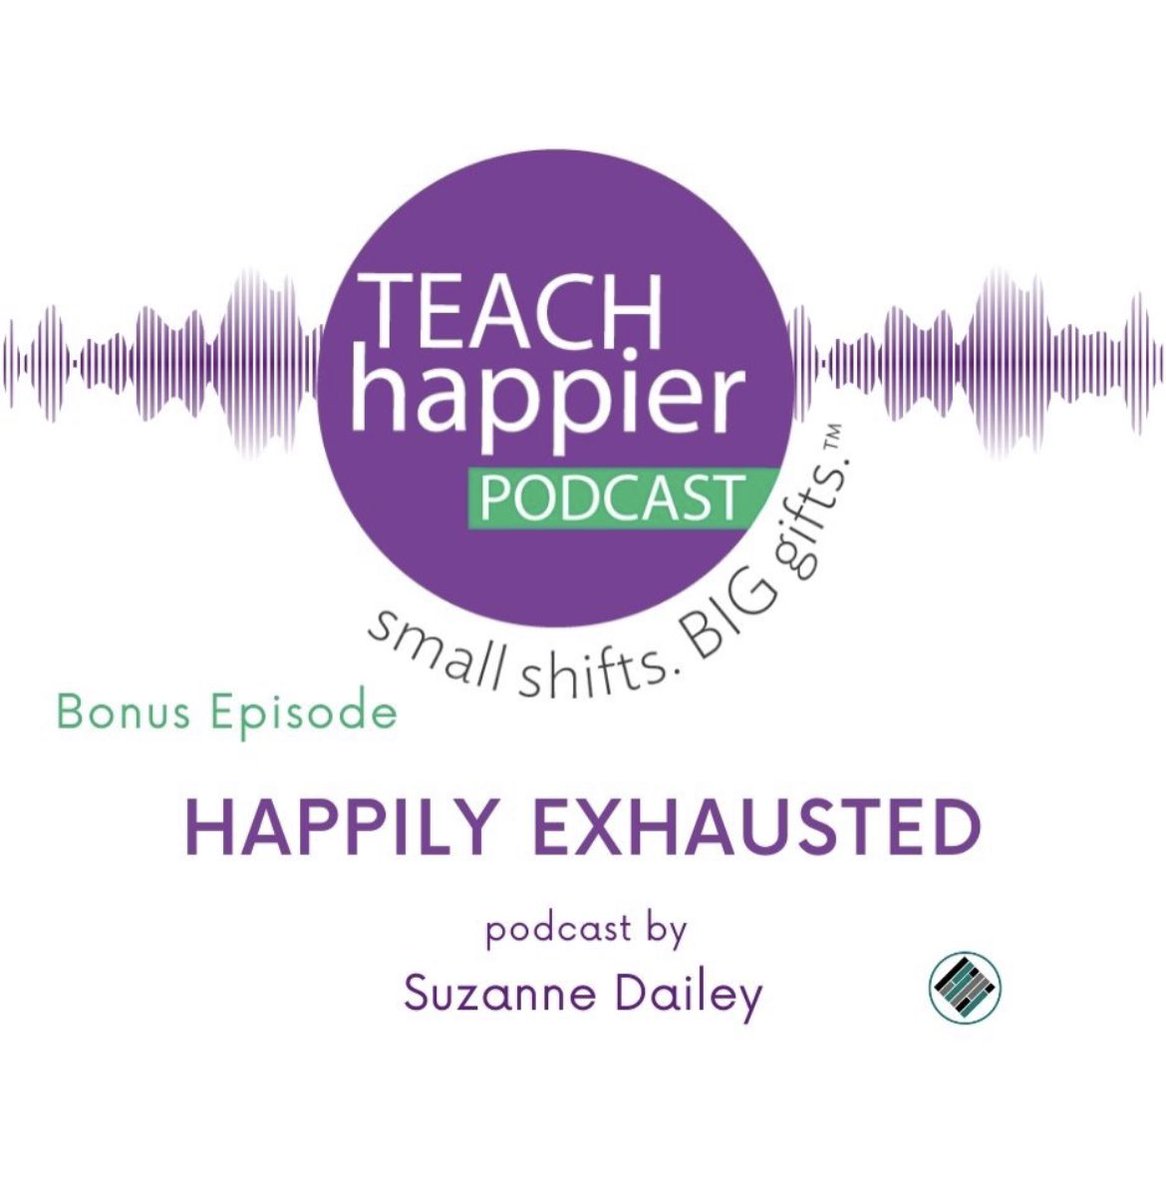 Another bonus Summer episode: Happily Exhausted 💜 Thanks for listening! podcasts.apple.com/us/podcast/tea…